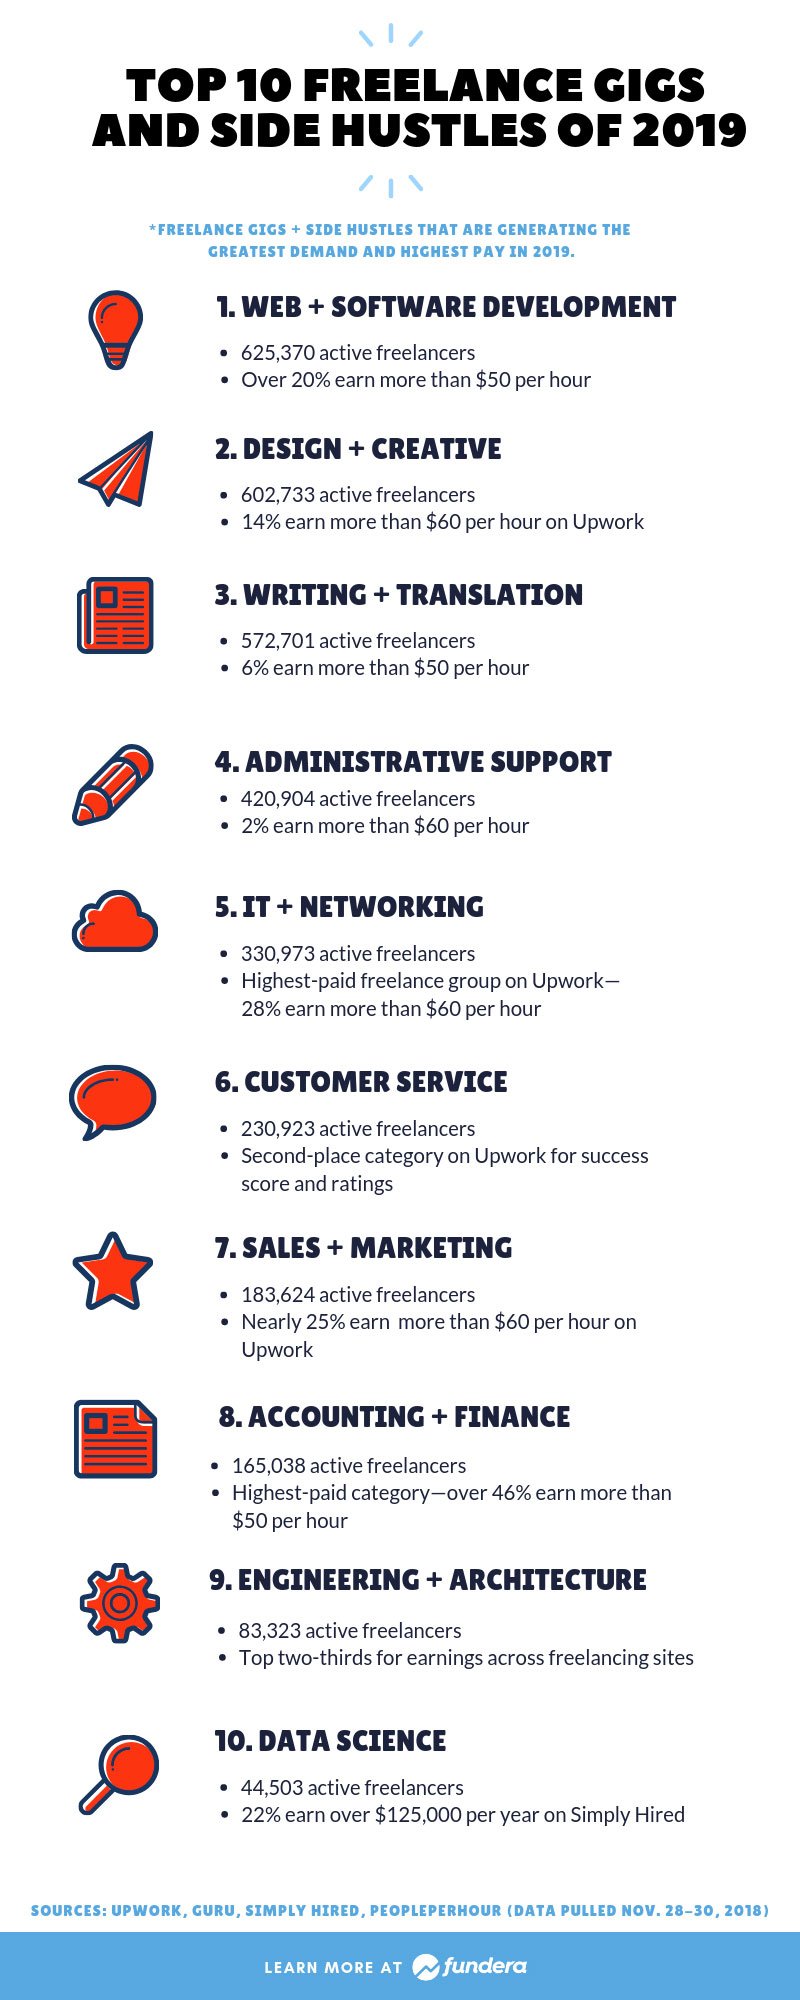 Infographic: Top 10 Freelance Gigs and Side Hustles of 2019